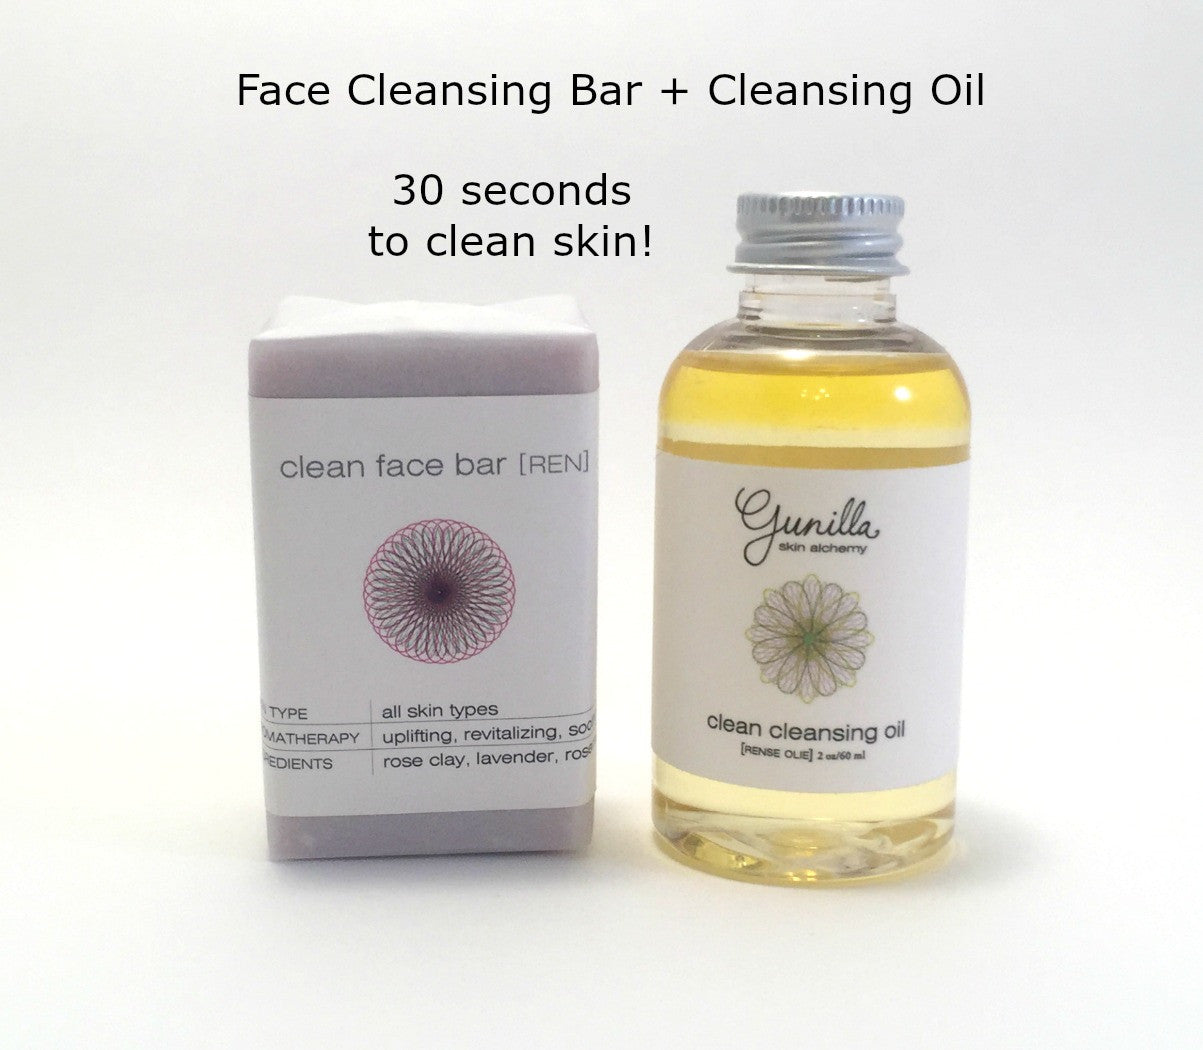 Learn how to clean your skin and get a blemish-free complexion!